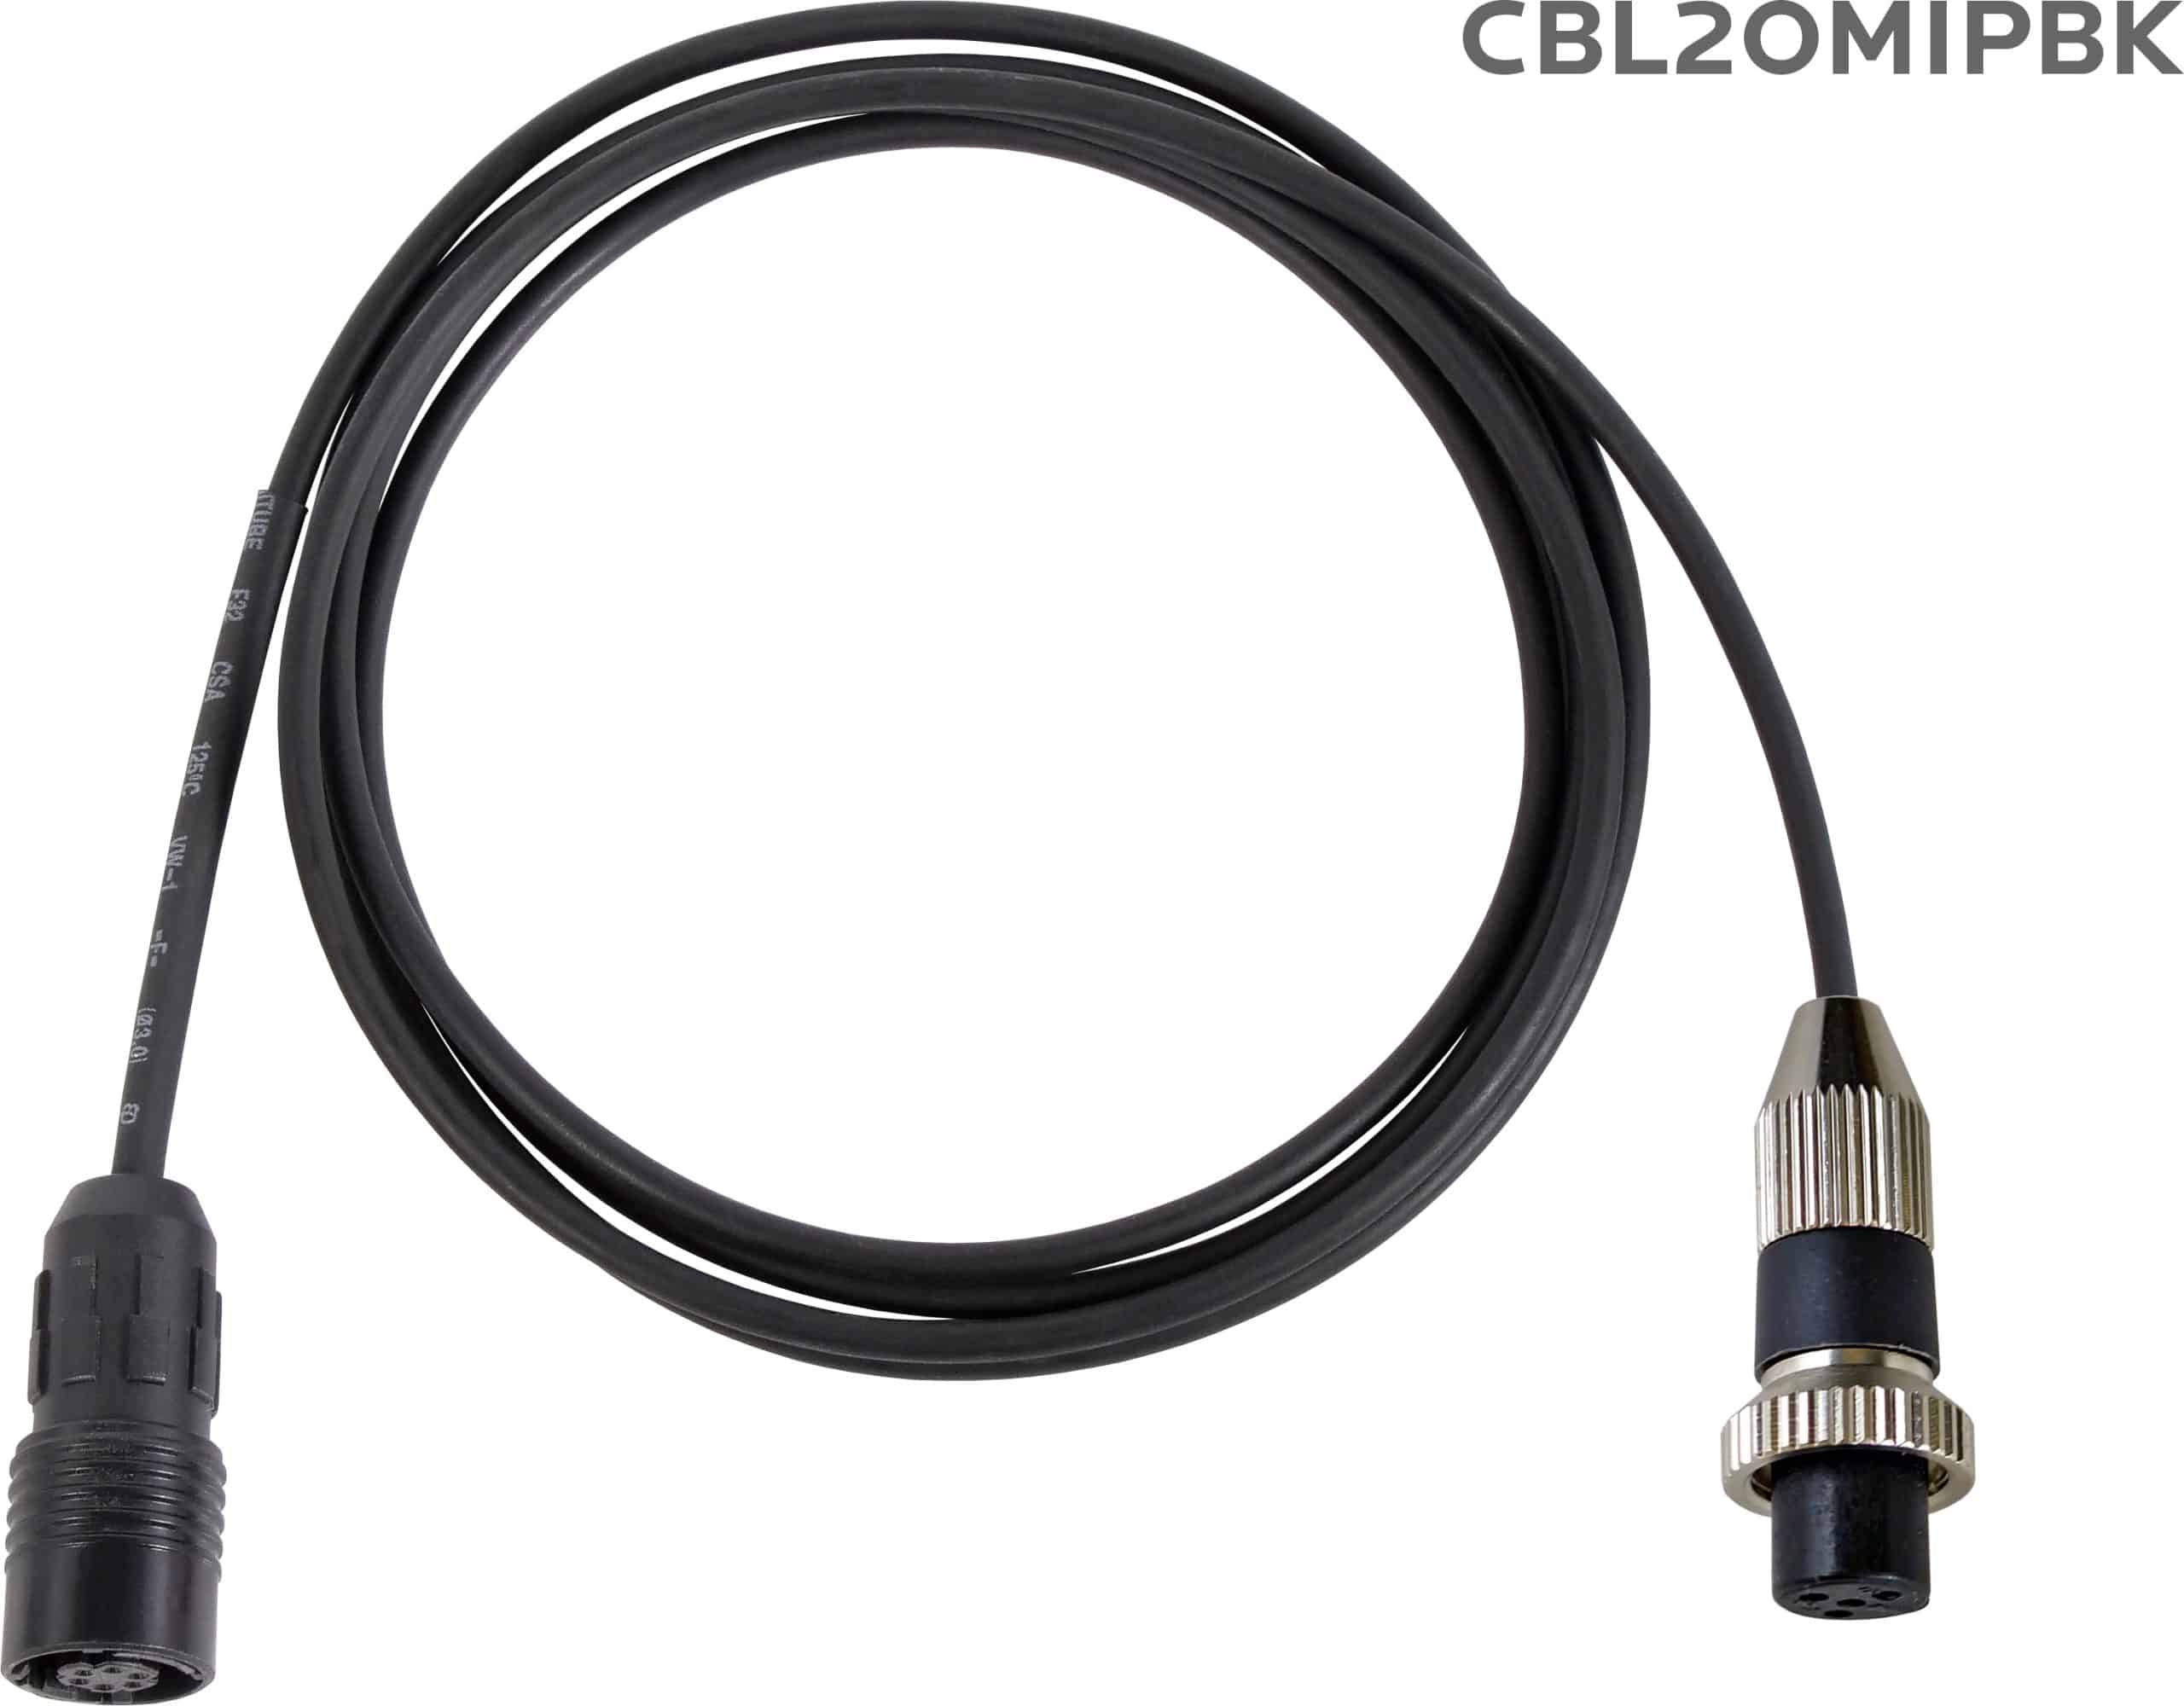 Replacement cable for H2O7 Wireless Headset Mic. The cable is wired to work with Mipro® systems.